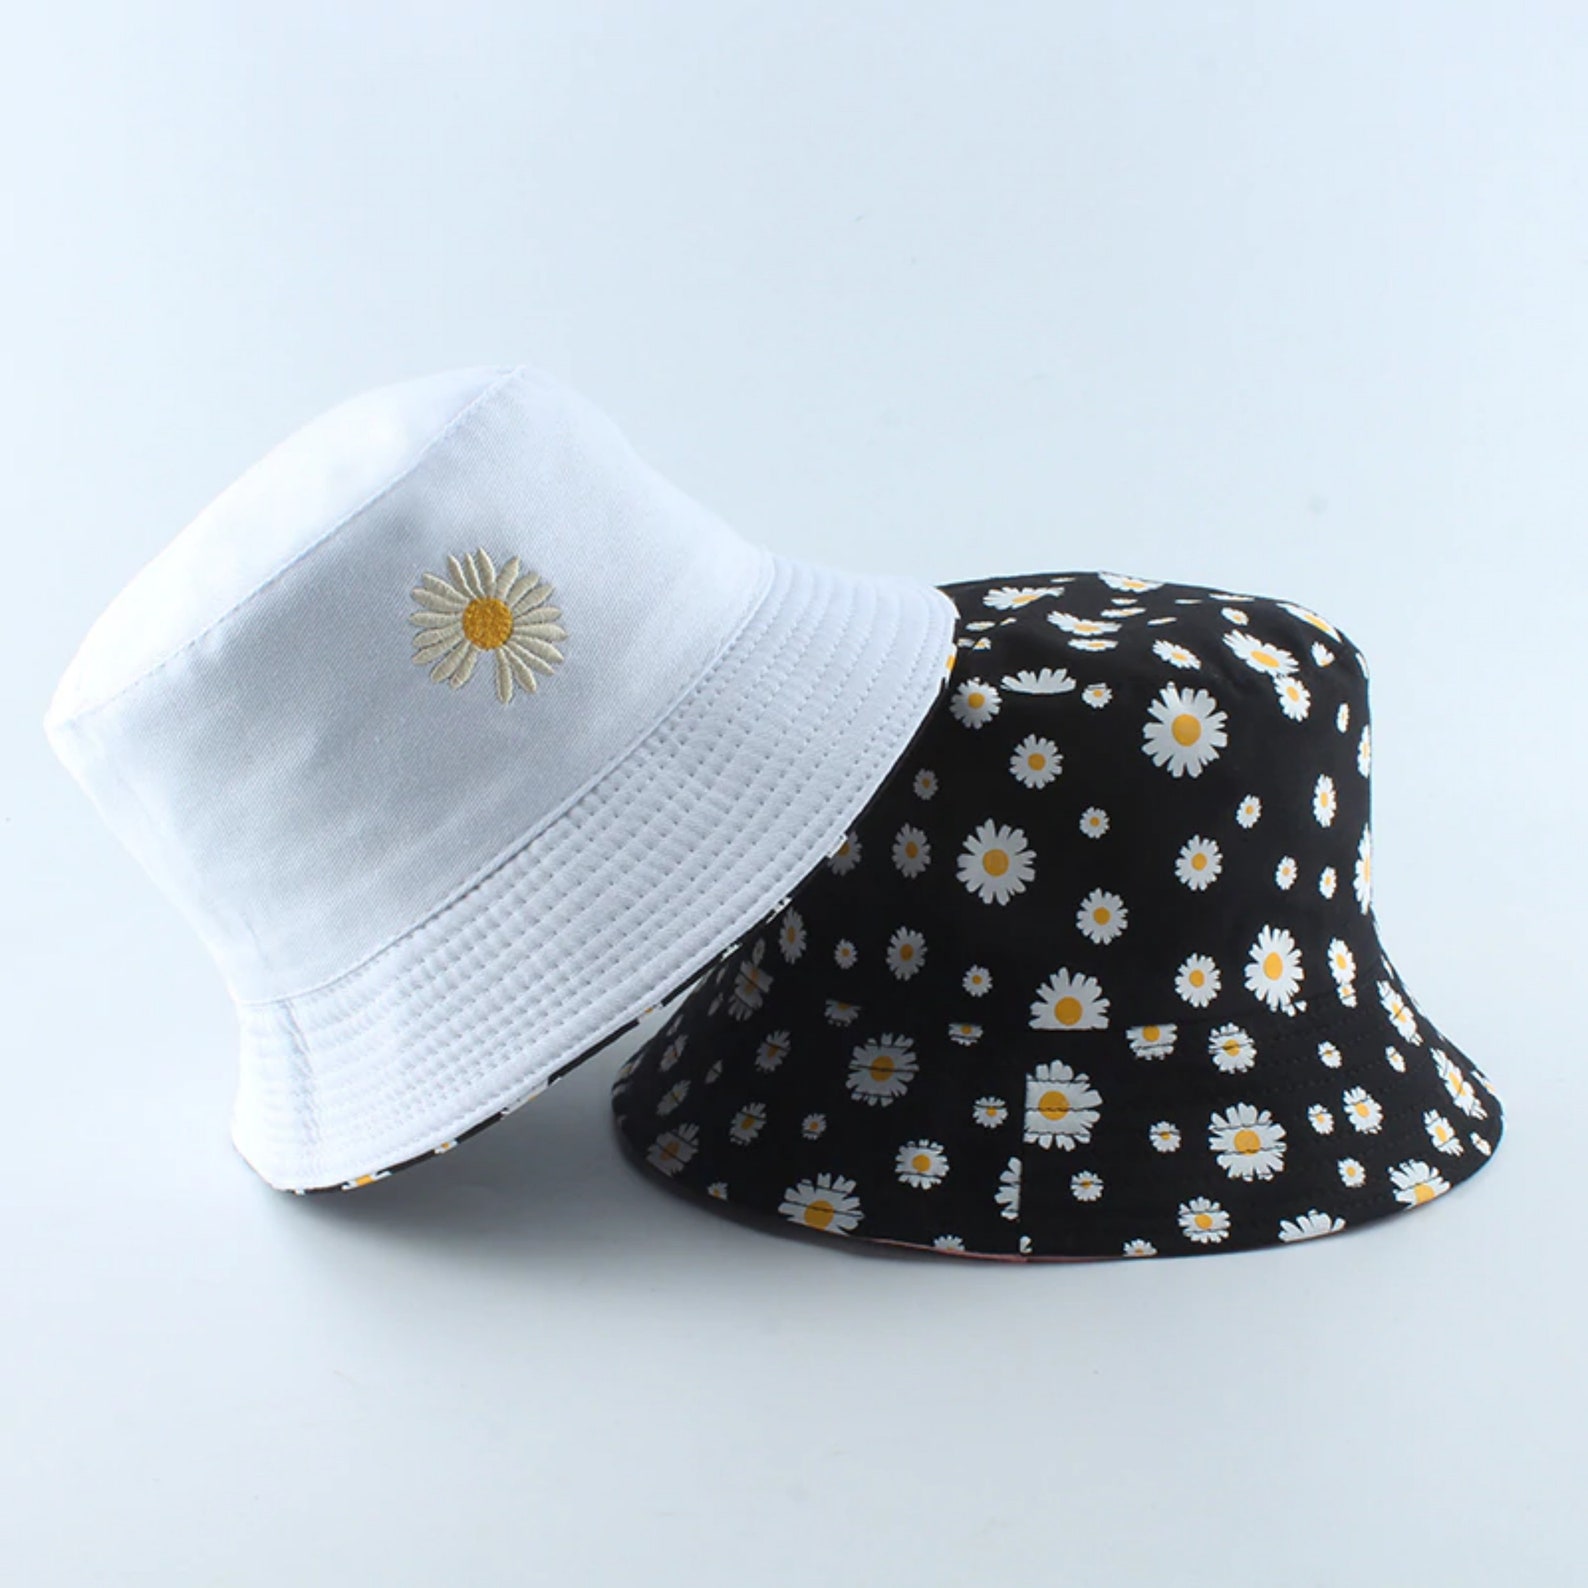 Daisy Bucket Hat Reversible Mother's Day Gift Floral - Etsy